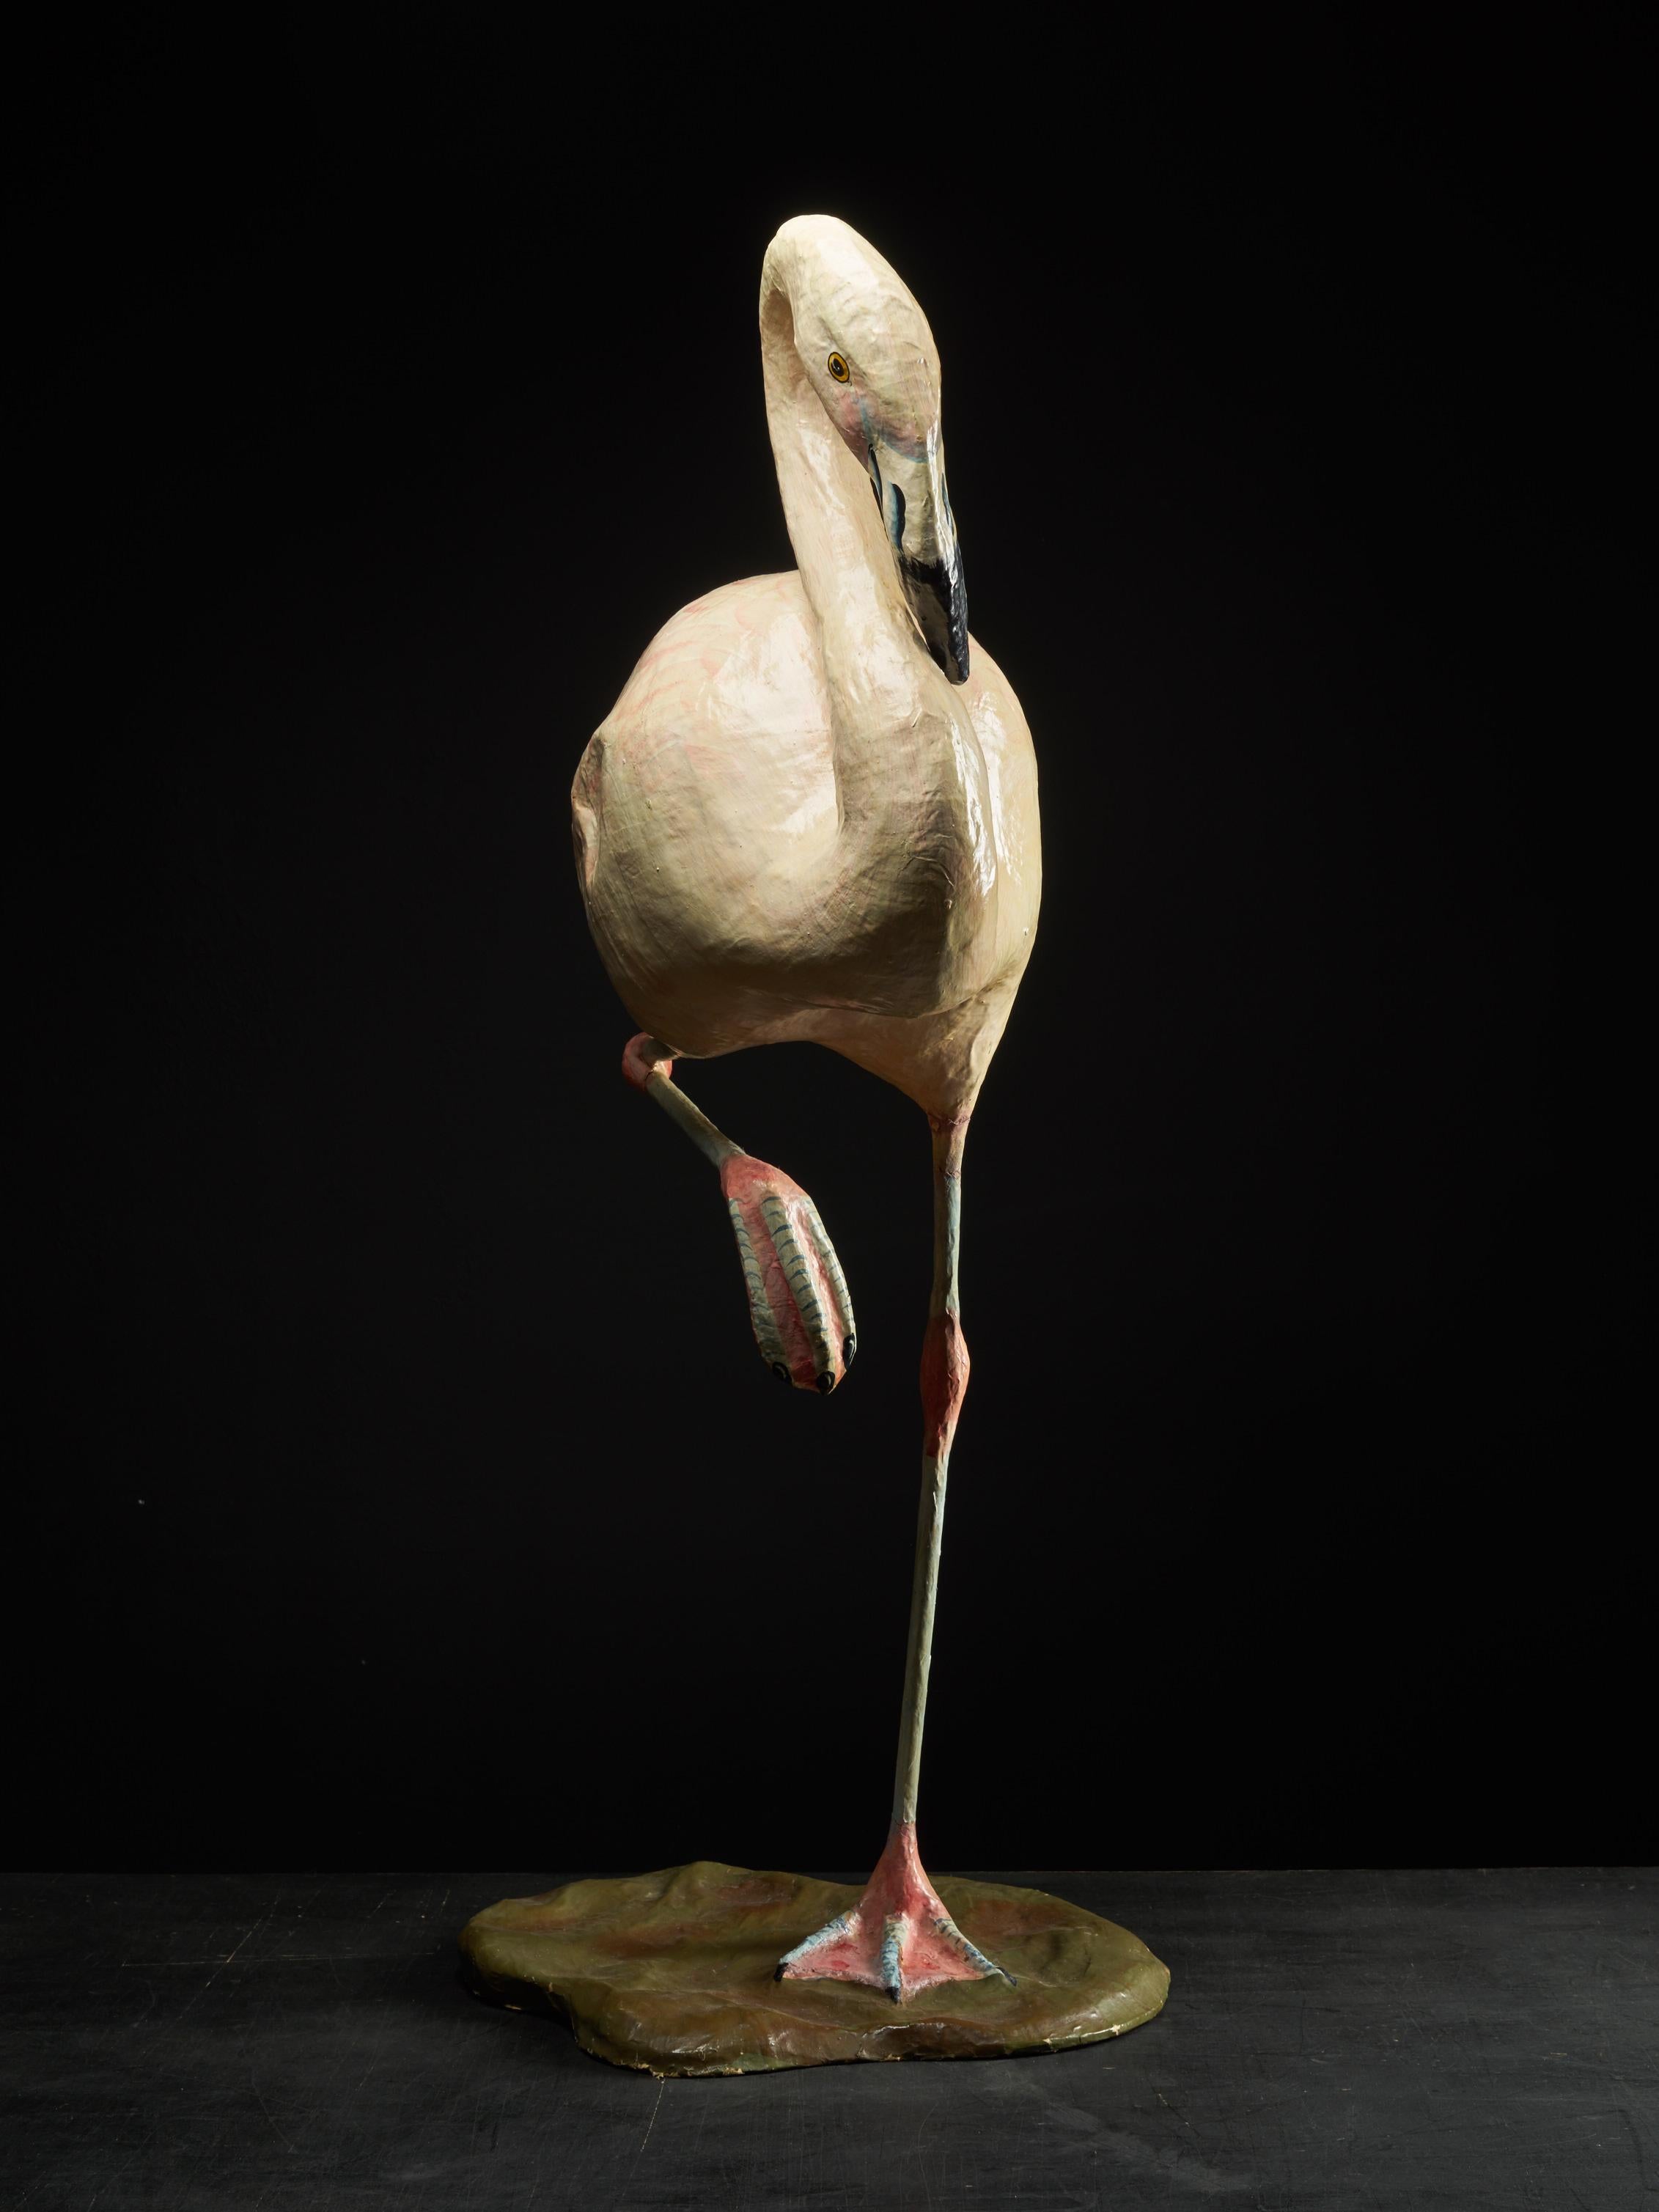 This handmade papier mâché flamingo has its original colors. It's about one meter high and stands on one leg. The flamingo dates from the mid-20th century.